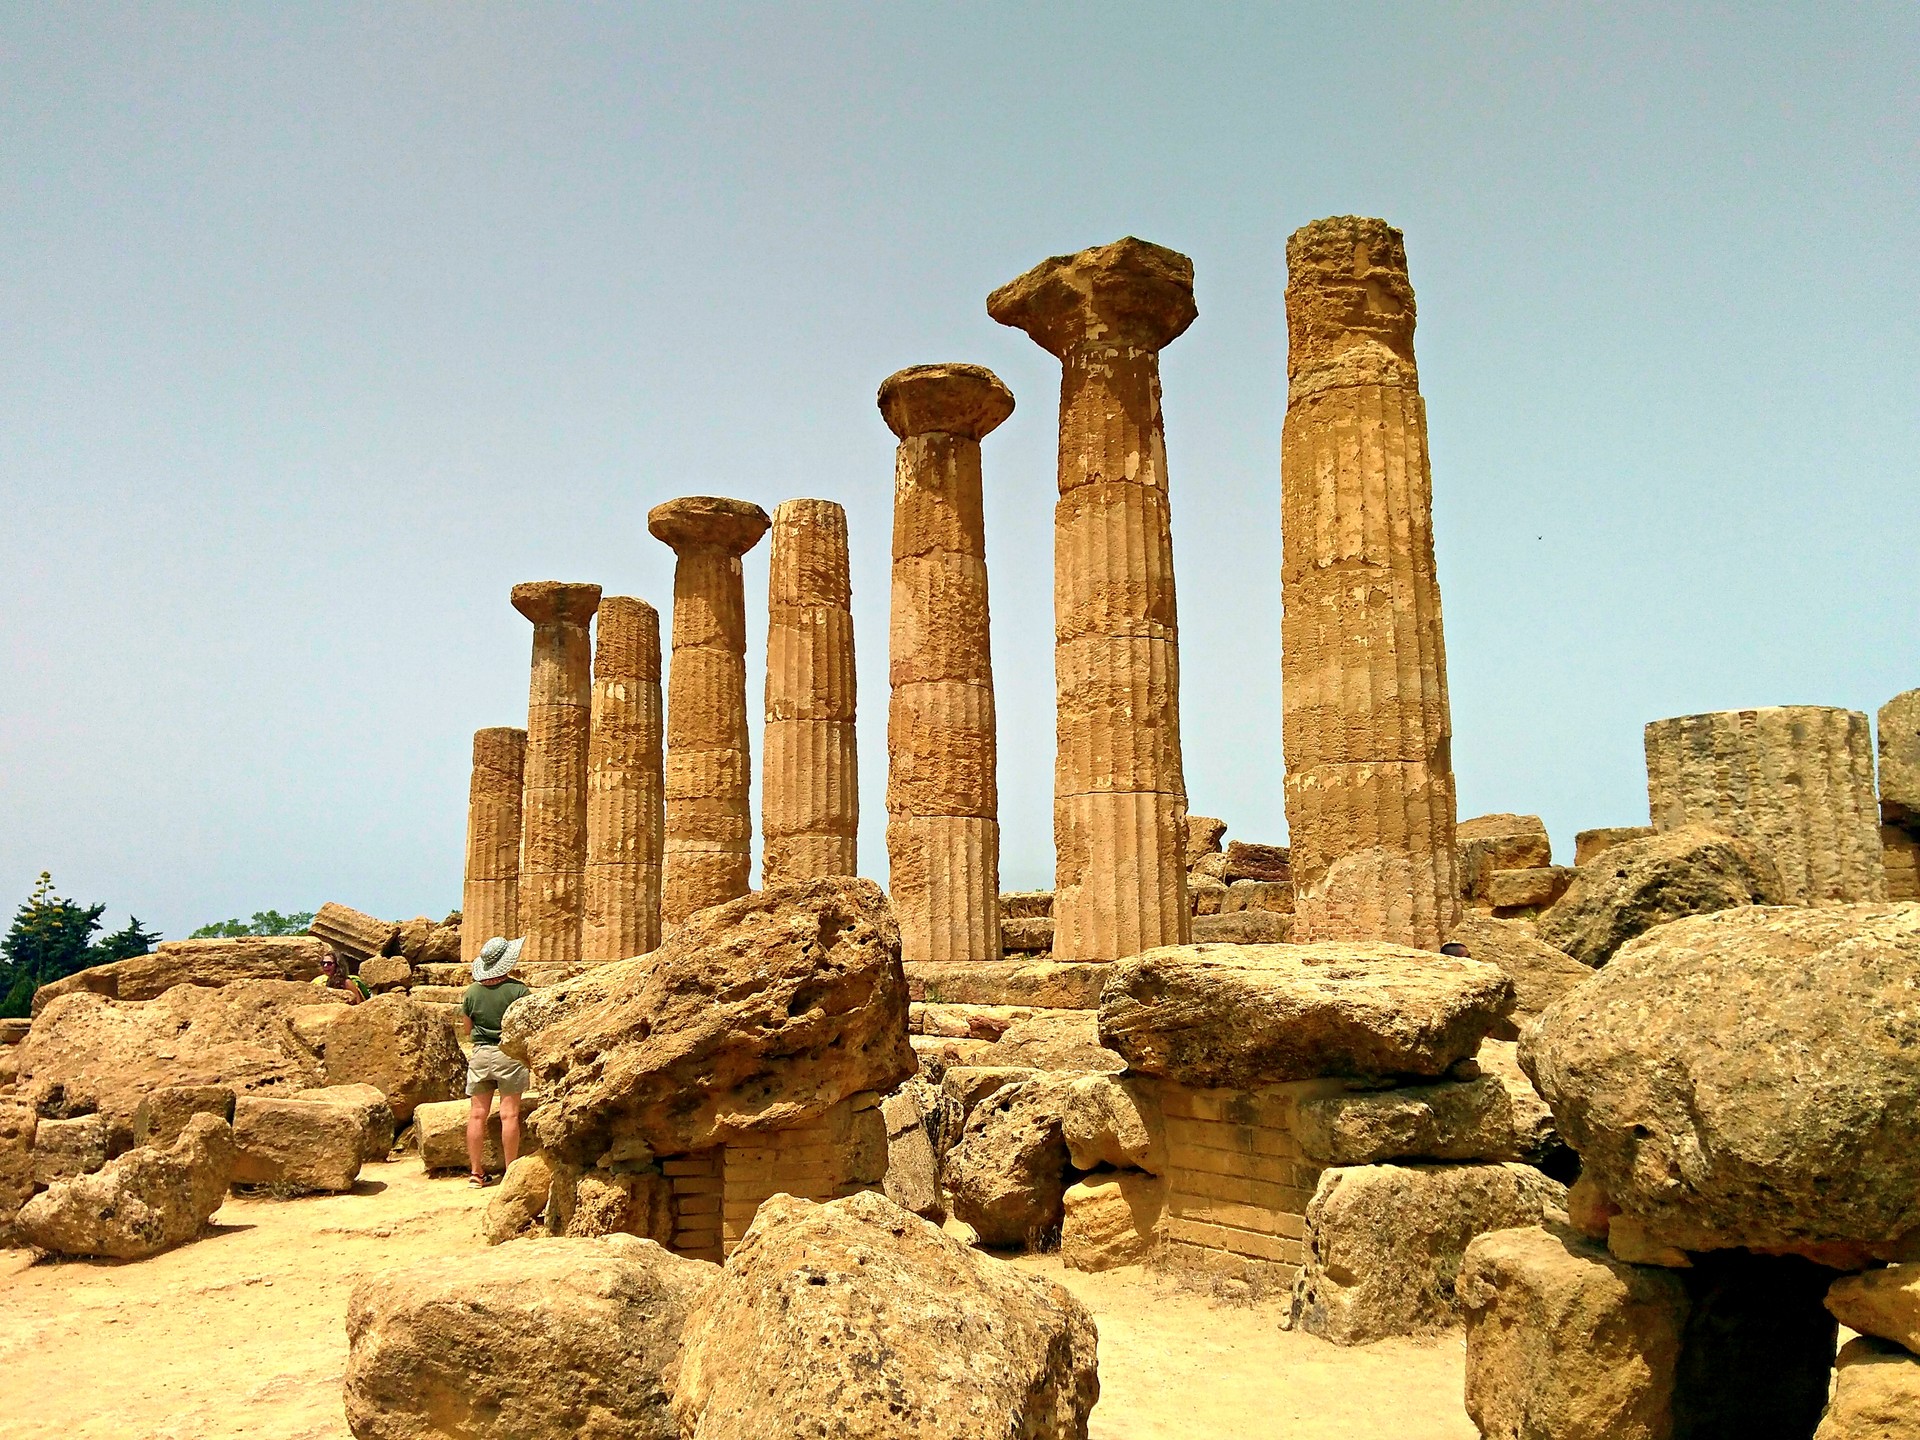 trip-valley-temples-agrigento-ce127e88ad